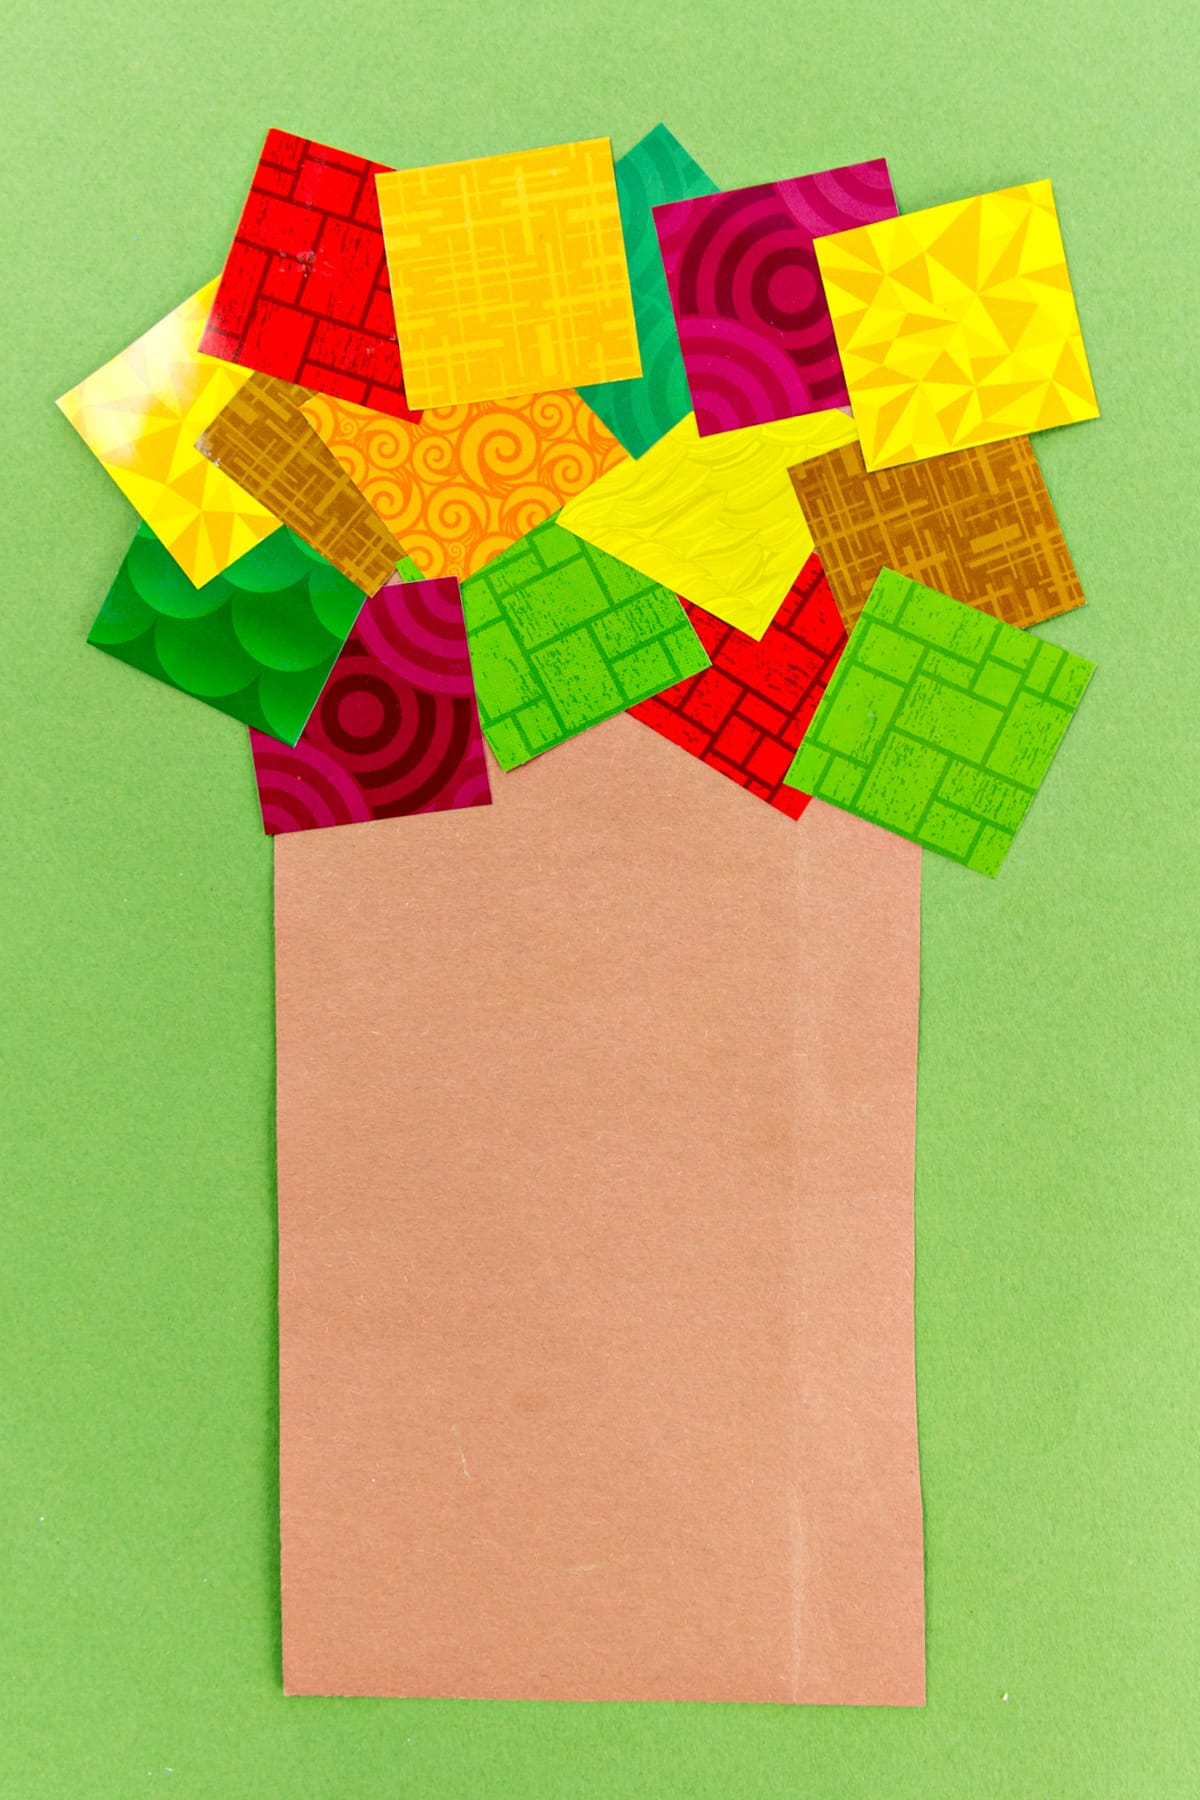 A paper tree craft made with construction paper and scrap paper squares